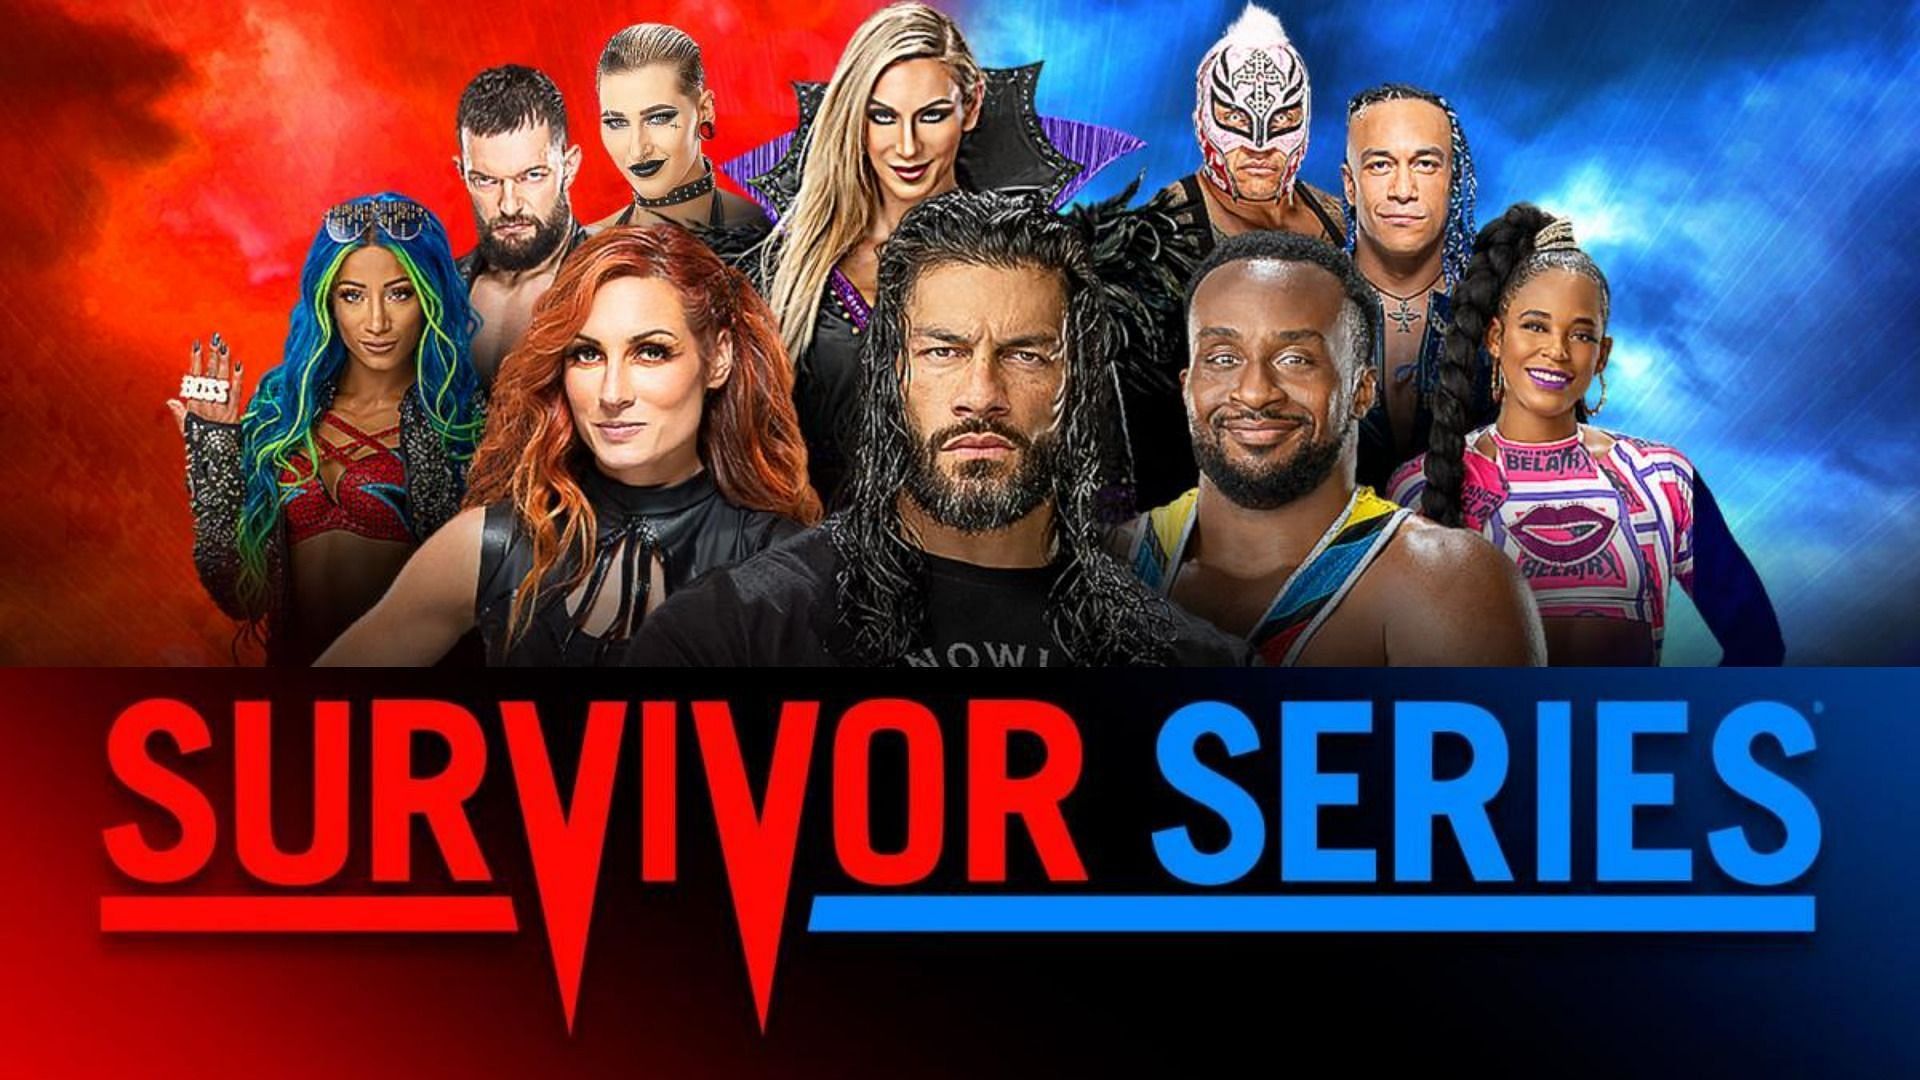 What is the start time for WWE Survivor Series 2021?